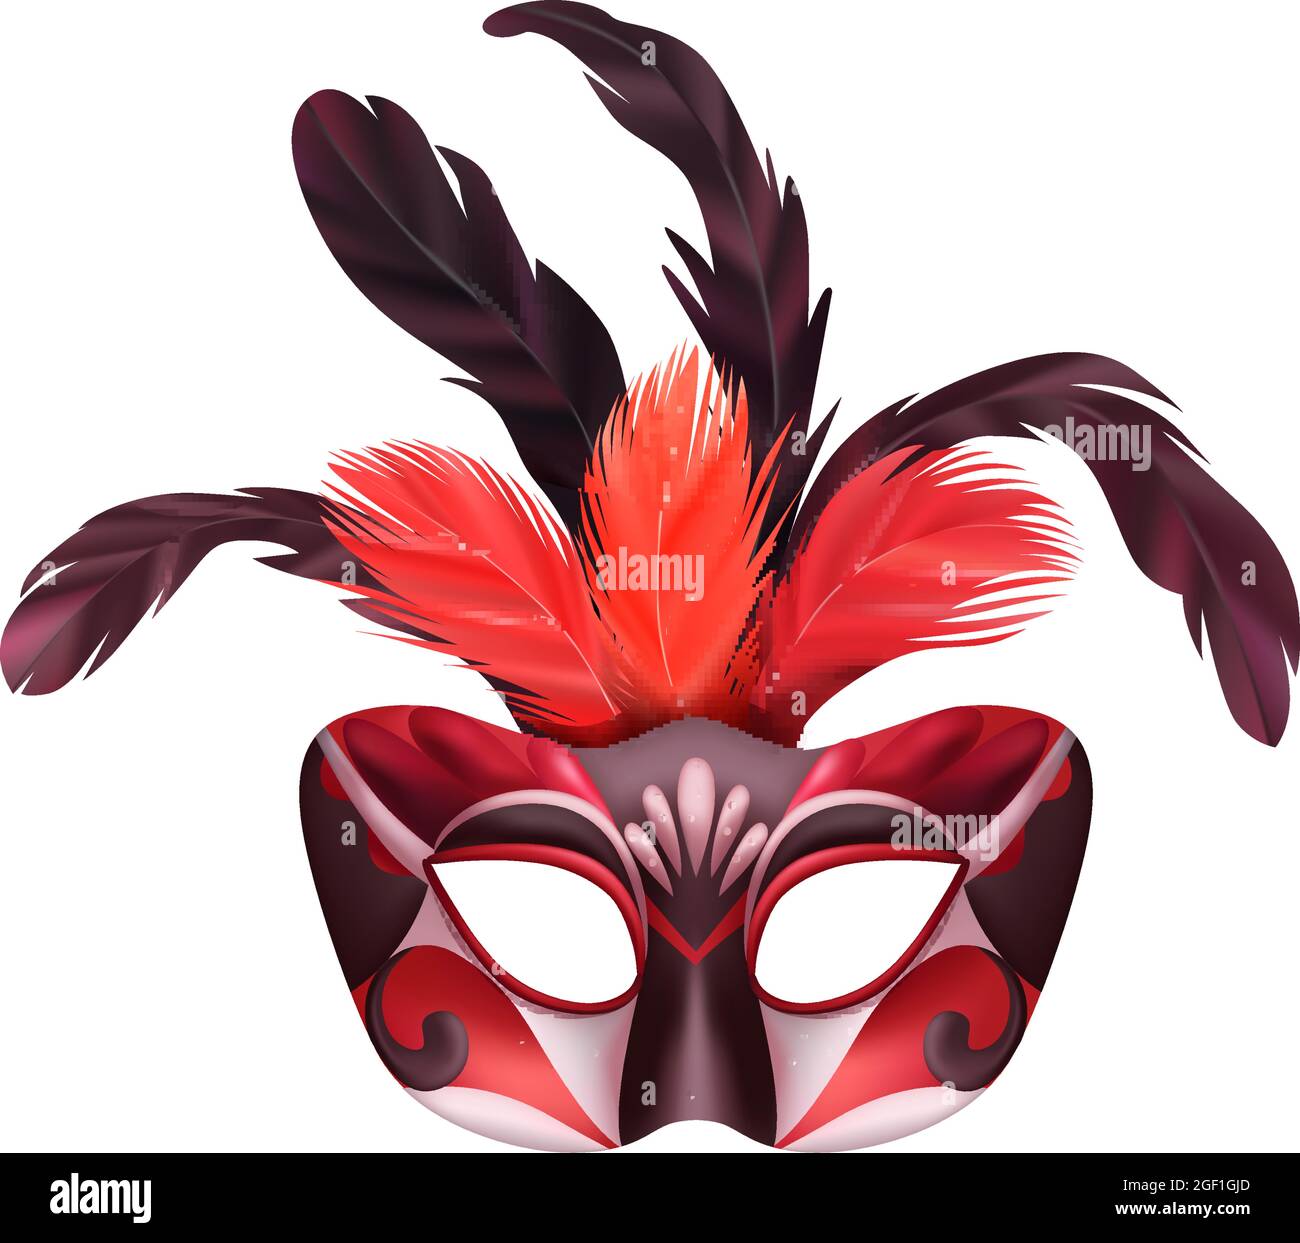 Realistic carvinal mask composition with isolated image of masquerade mask with black and red decorations vector illustration Stock Vector